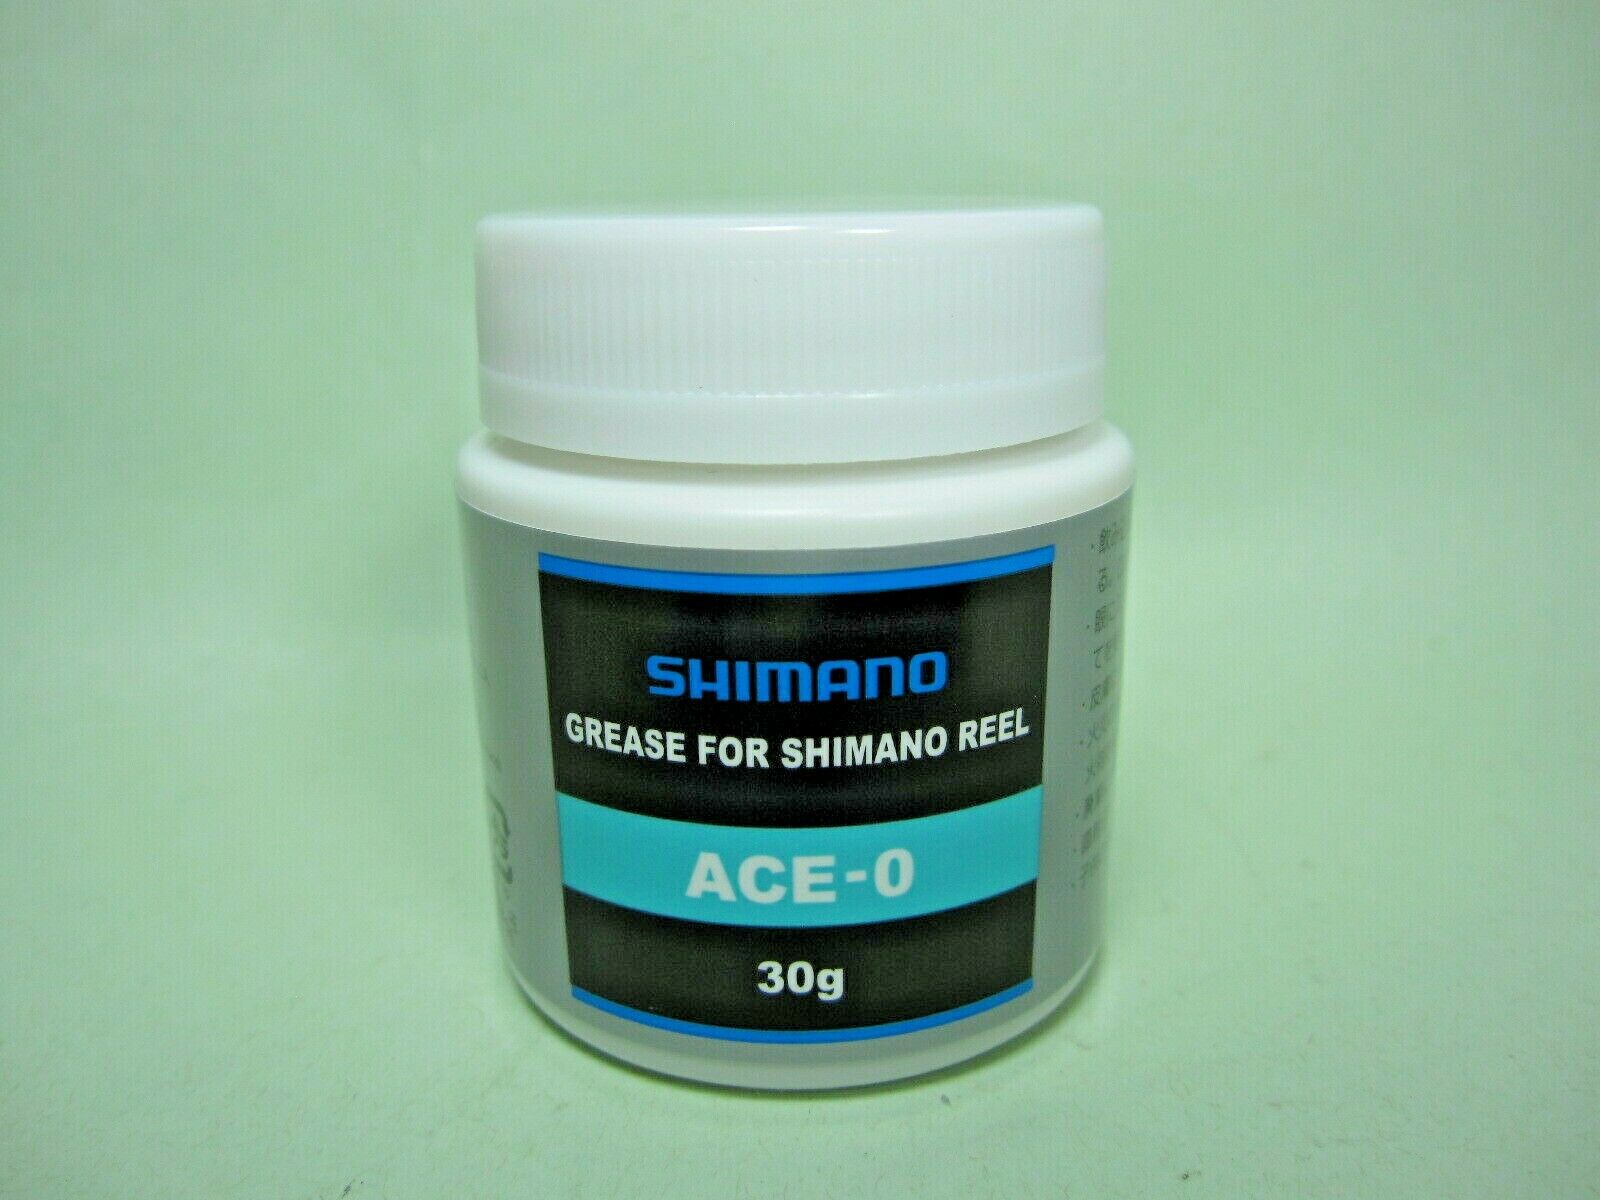  Shimano Reel Oil And Grease